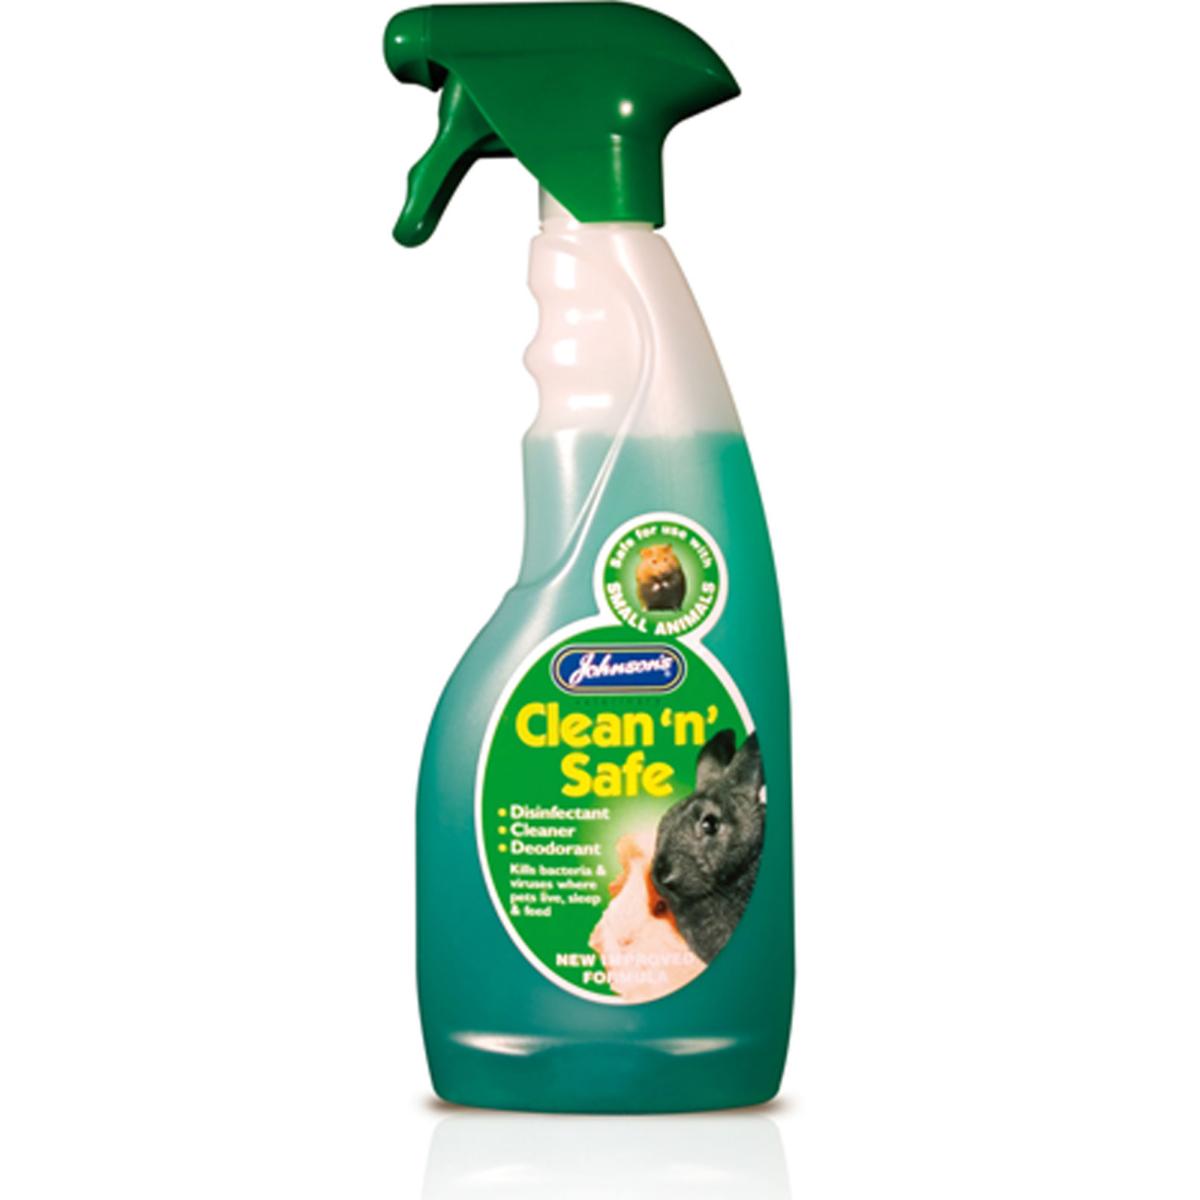 Johnson's Veterinary | Small Pet Cleaning | Clean 'N' Safe Disinfectant - 500ml